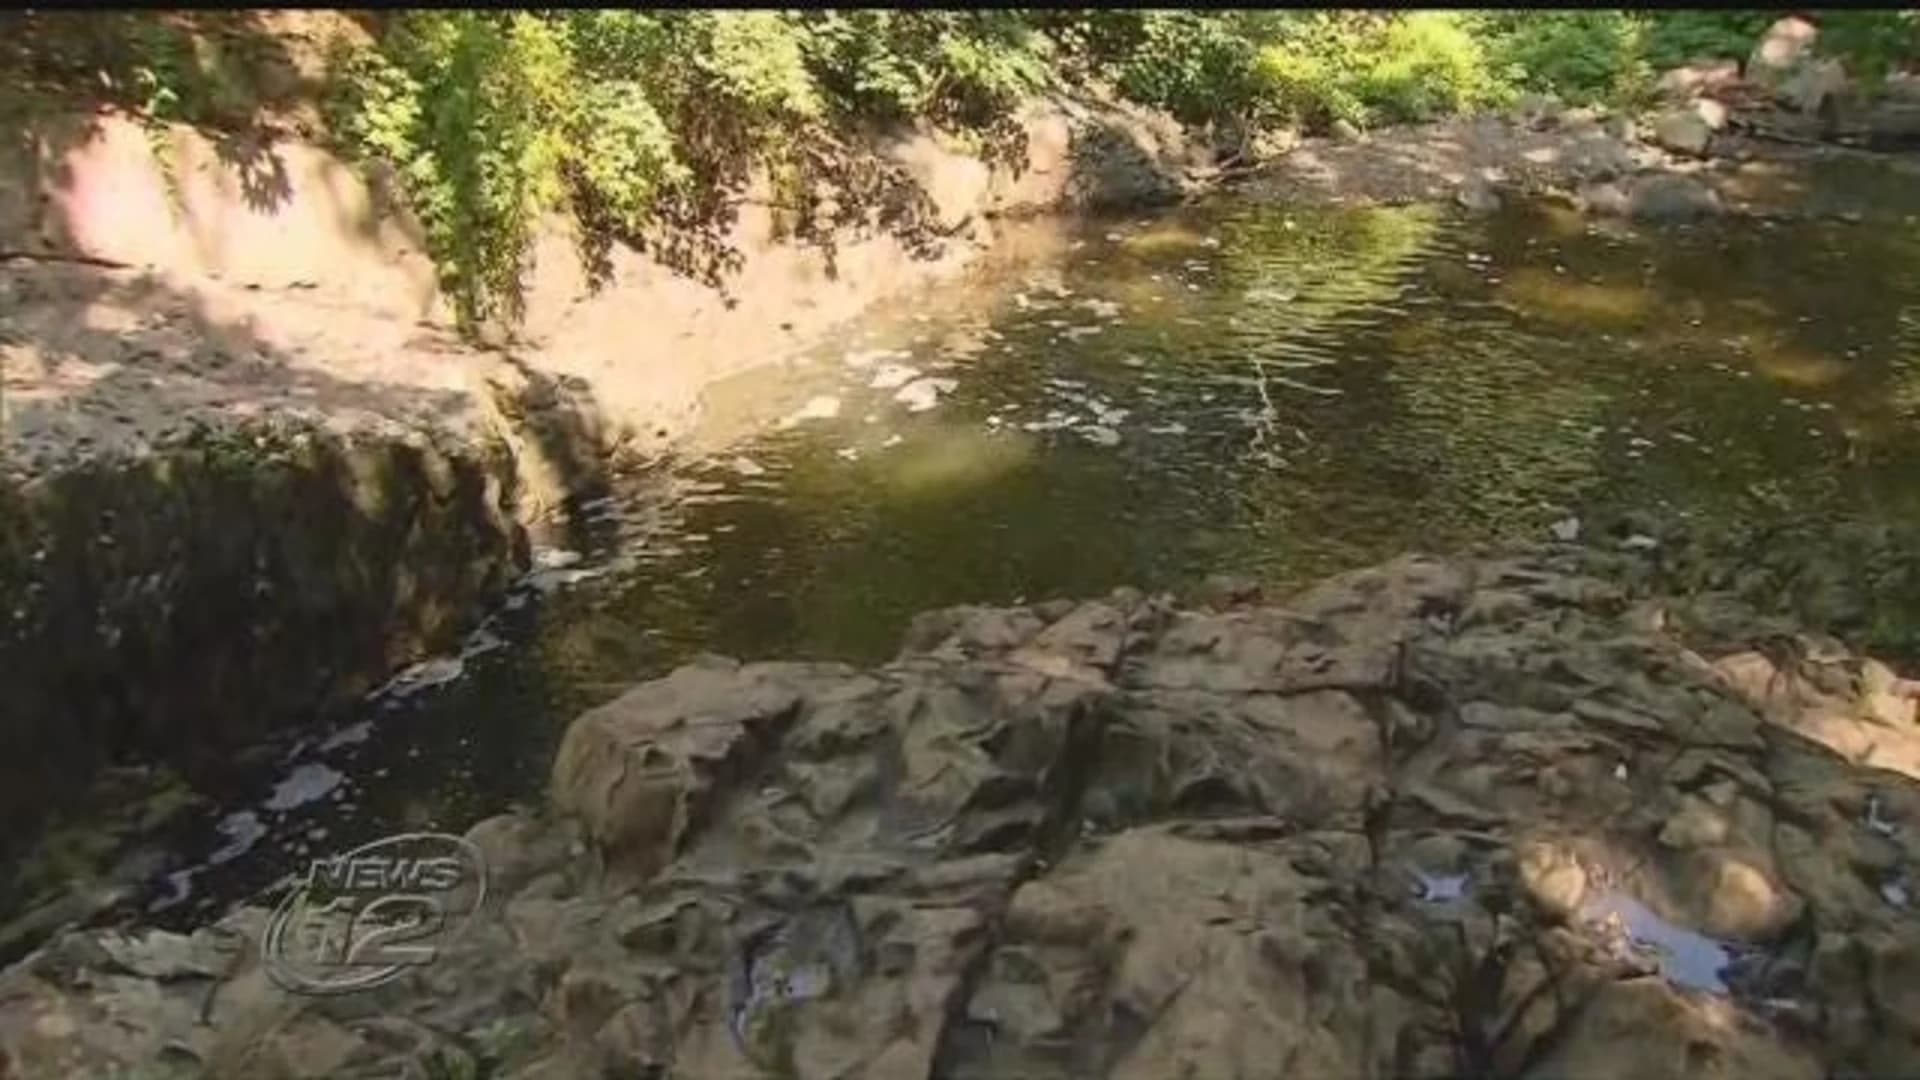 Cedar Grove officials warn against swimming at ‘Devil's Hole’